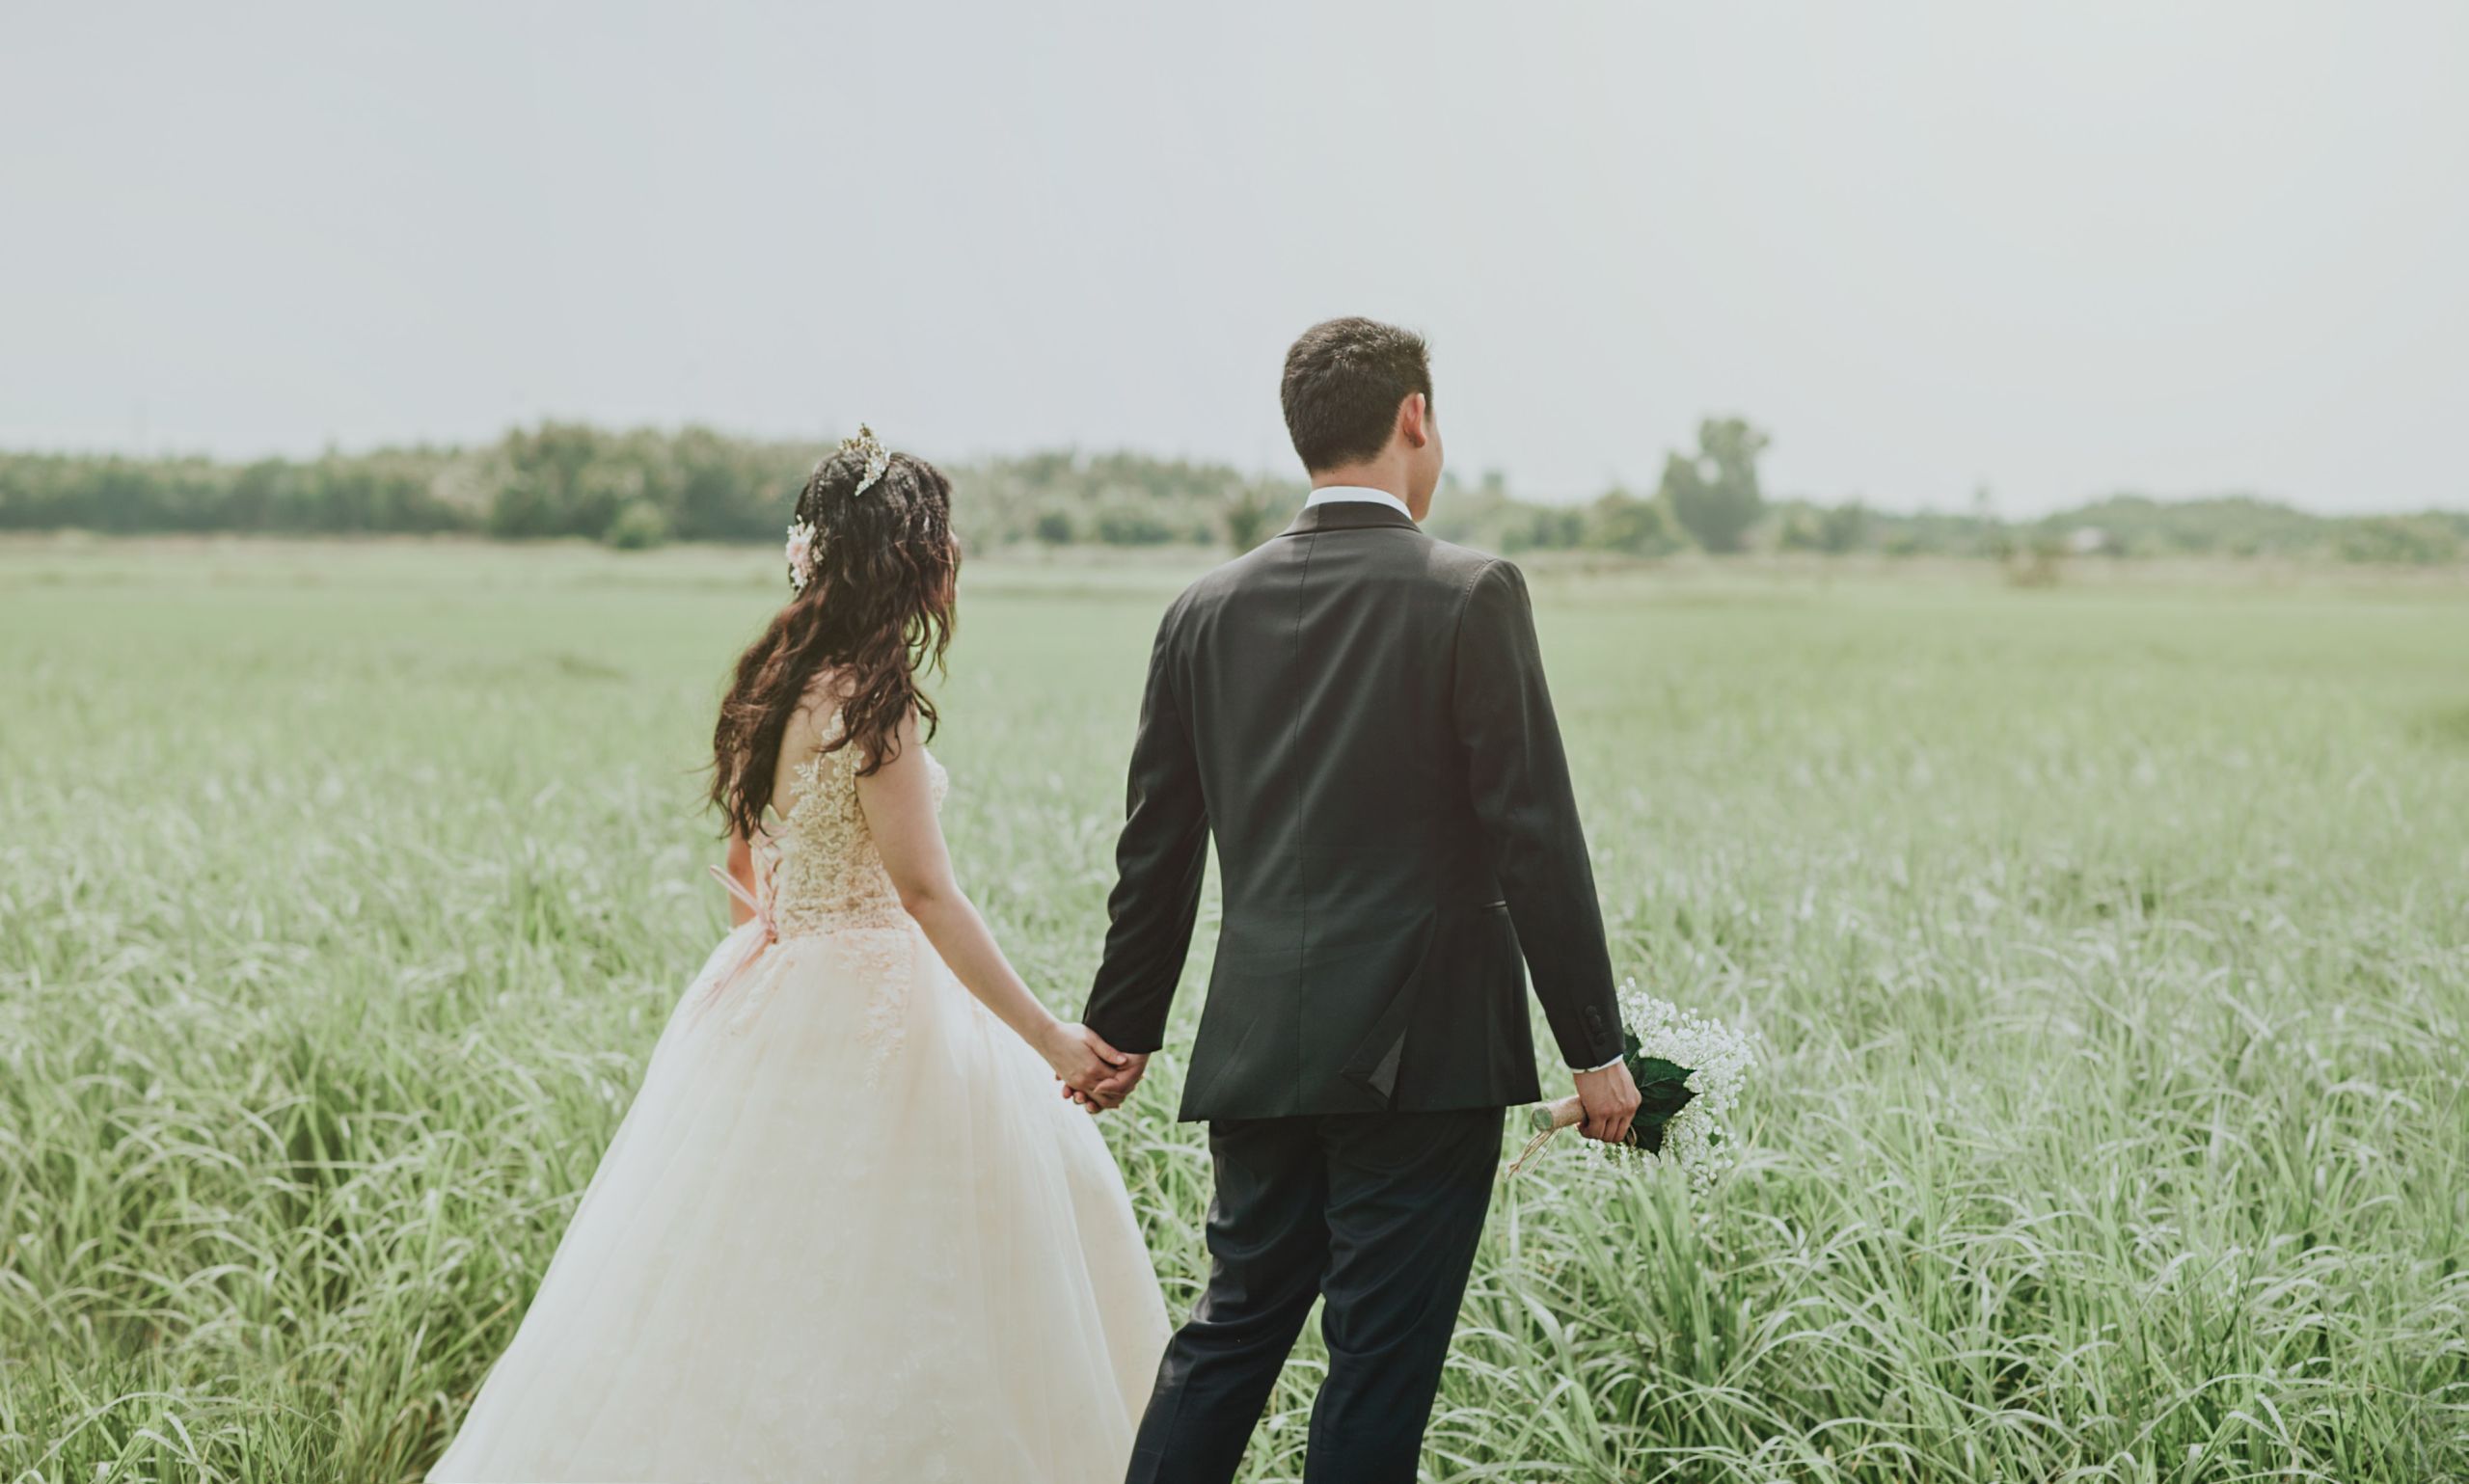 New Wedding Couple Holding Hands Hd Wallpapers Free.